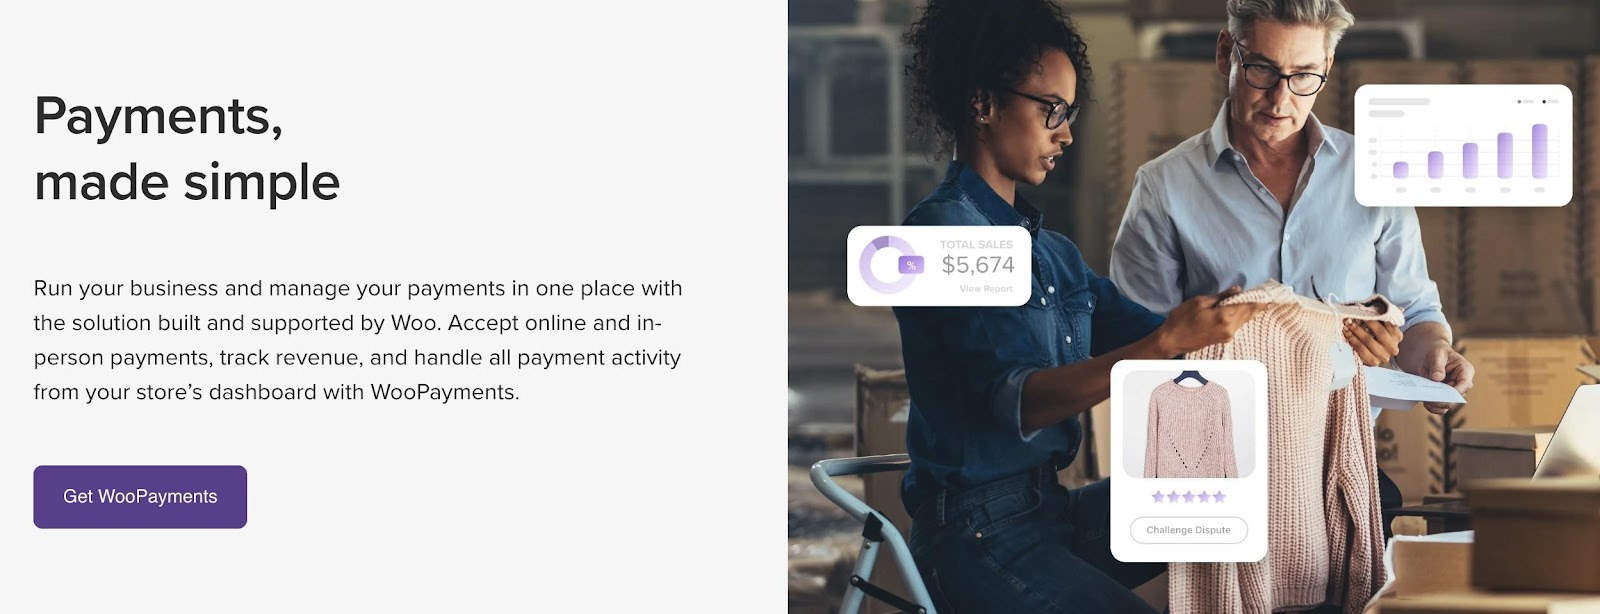 How to set up WooCommerce Payments.